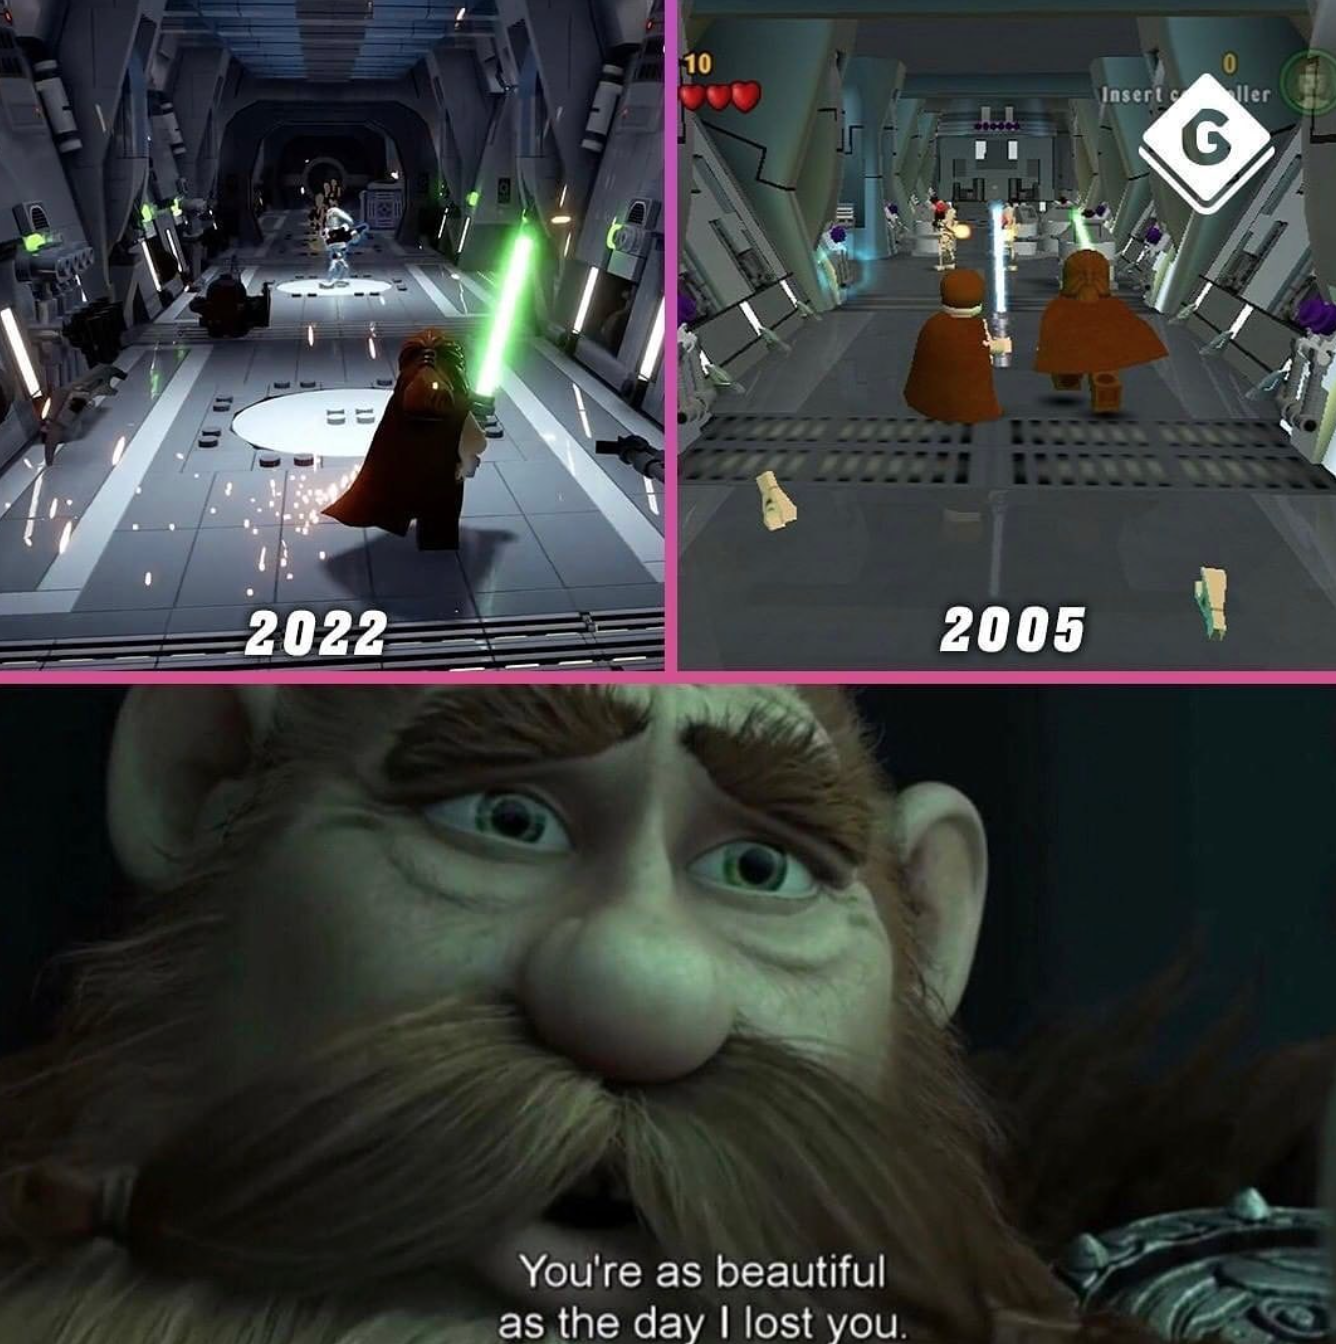 funny gaming memes - lego star wars - ter 2022 2005 You're as beautiful as the day I lost you.